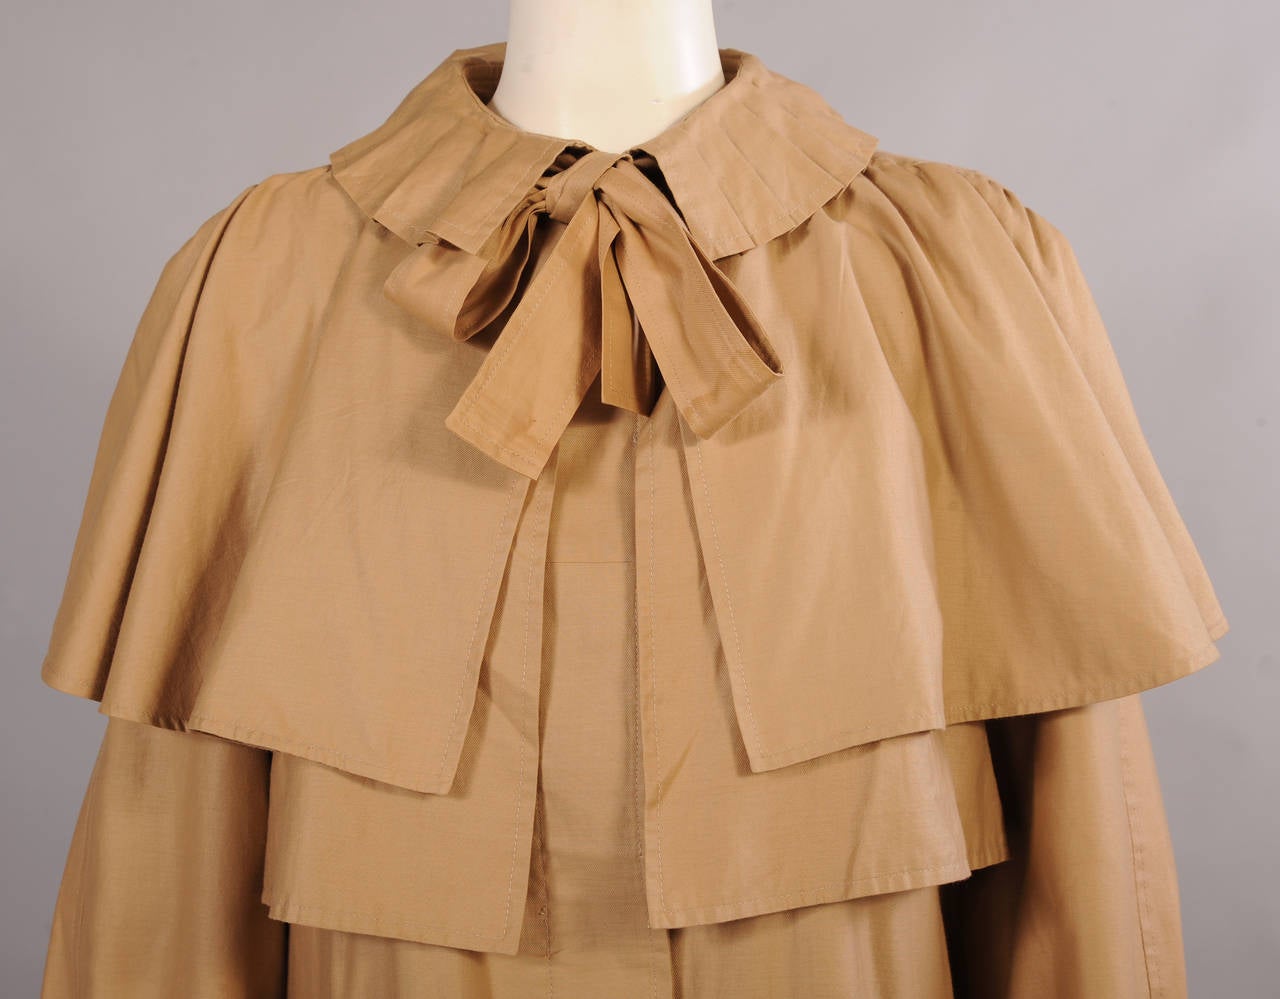 A ruffled collar and an attached capelet add interest to this cotton coat from the 1970's. The bow at the neckline is really just the matching belt tied under the collar. The coat has hidden buttons, D rings on the cuffs and two pockets. It is in